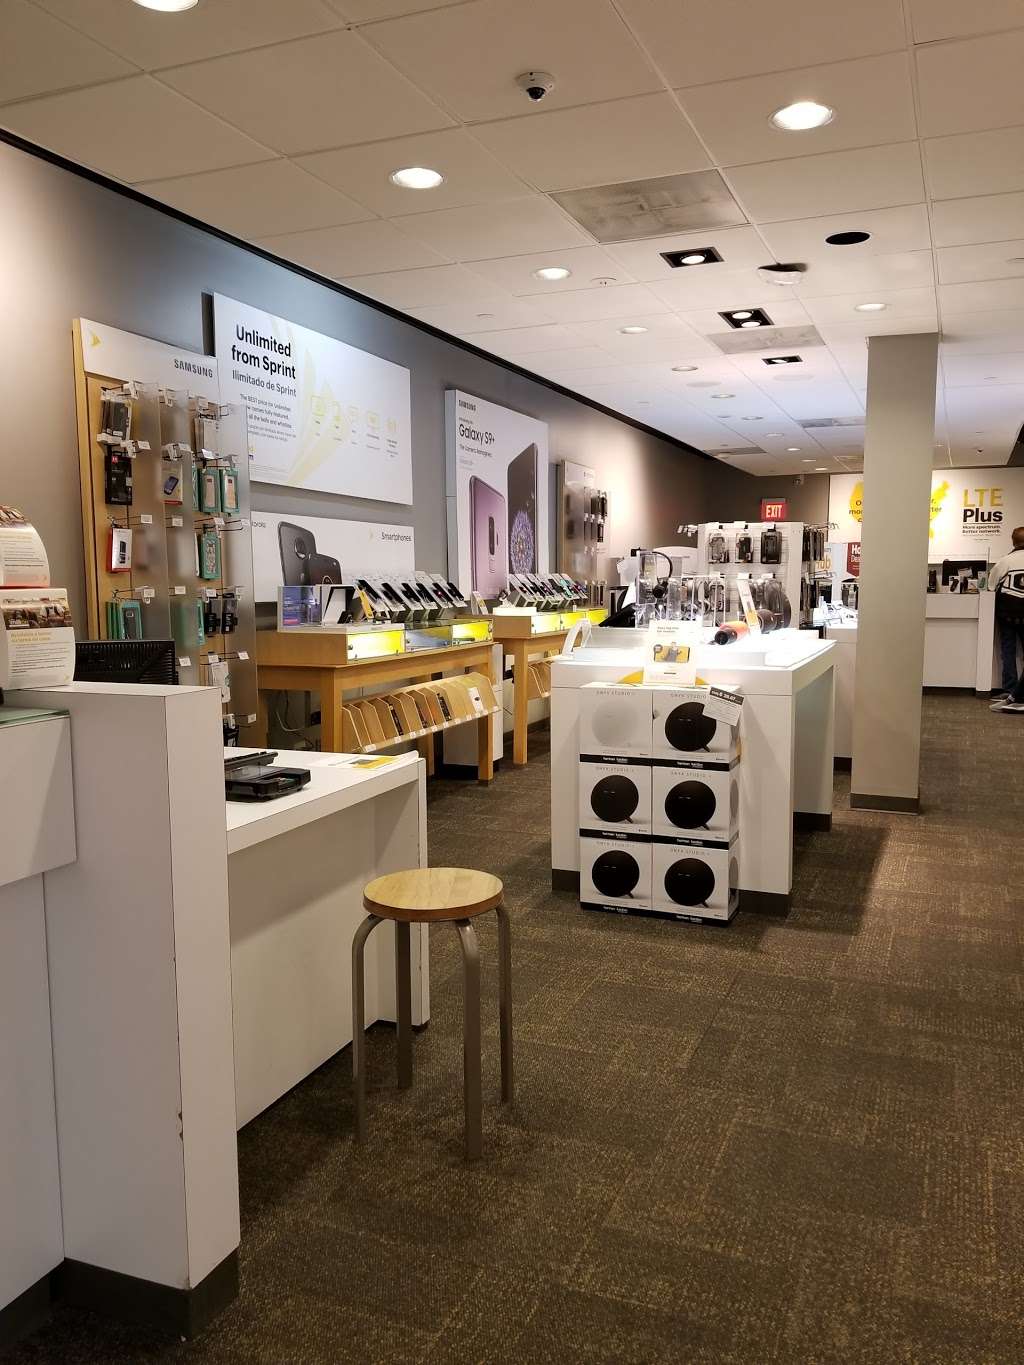 Sprint Store | 400 N Center St, Westminster, MD 21157, USA | Phone: (410) 871-9945